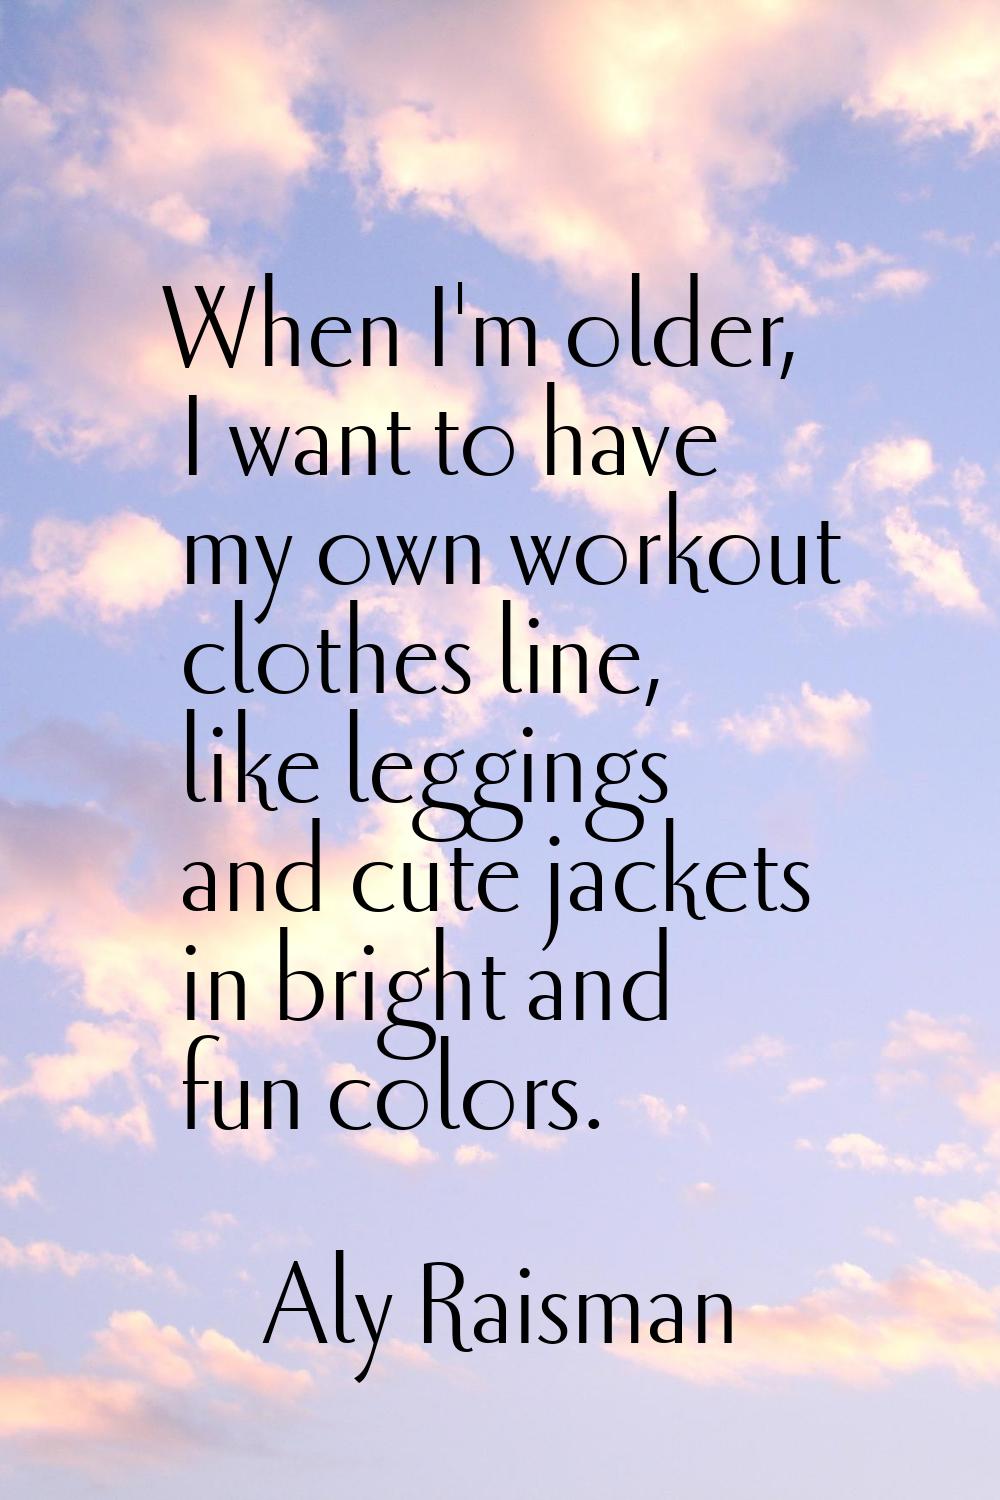 When I'm older, I want to have my own workout clothes line, like leggings and cute jackets in brigh